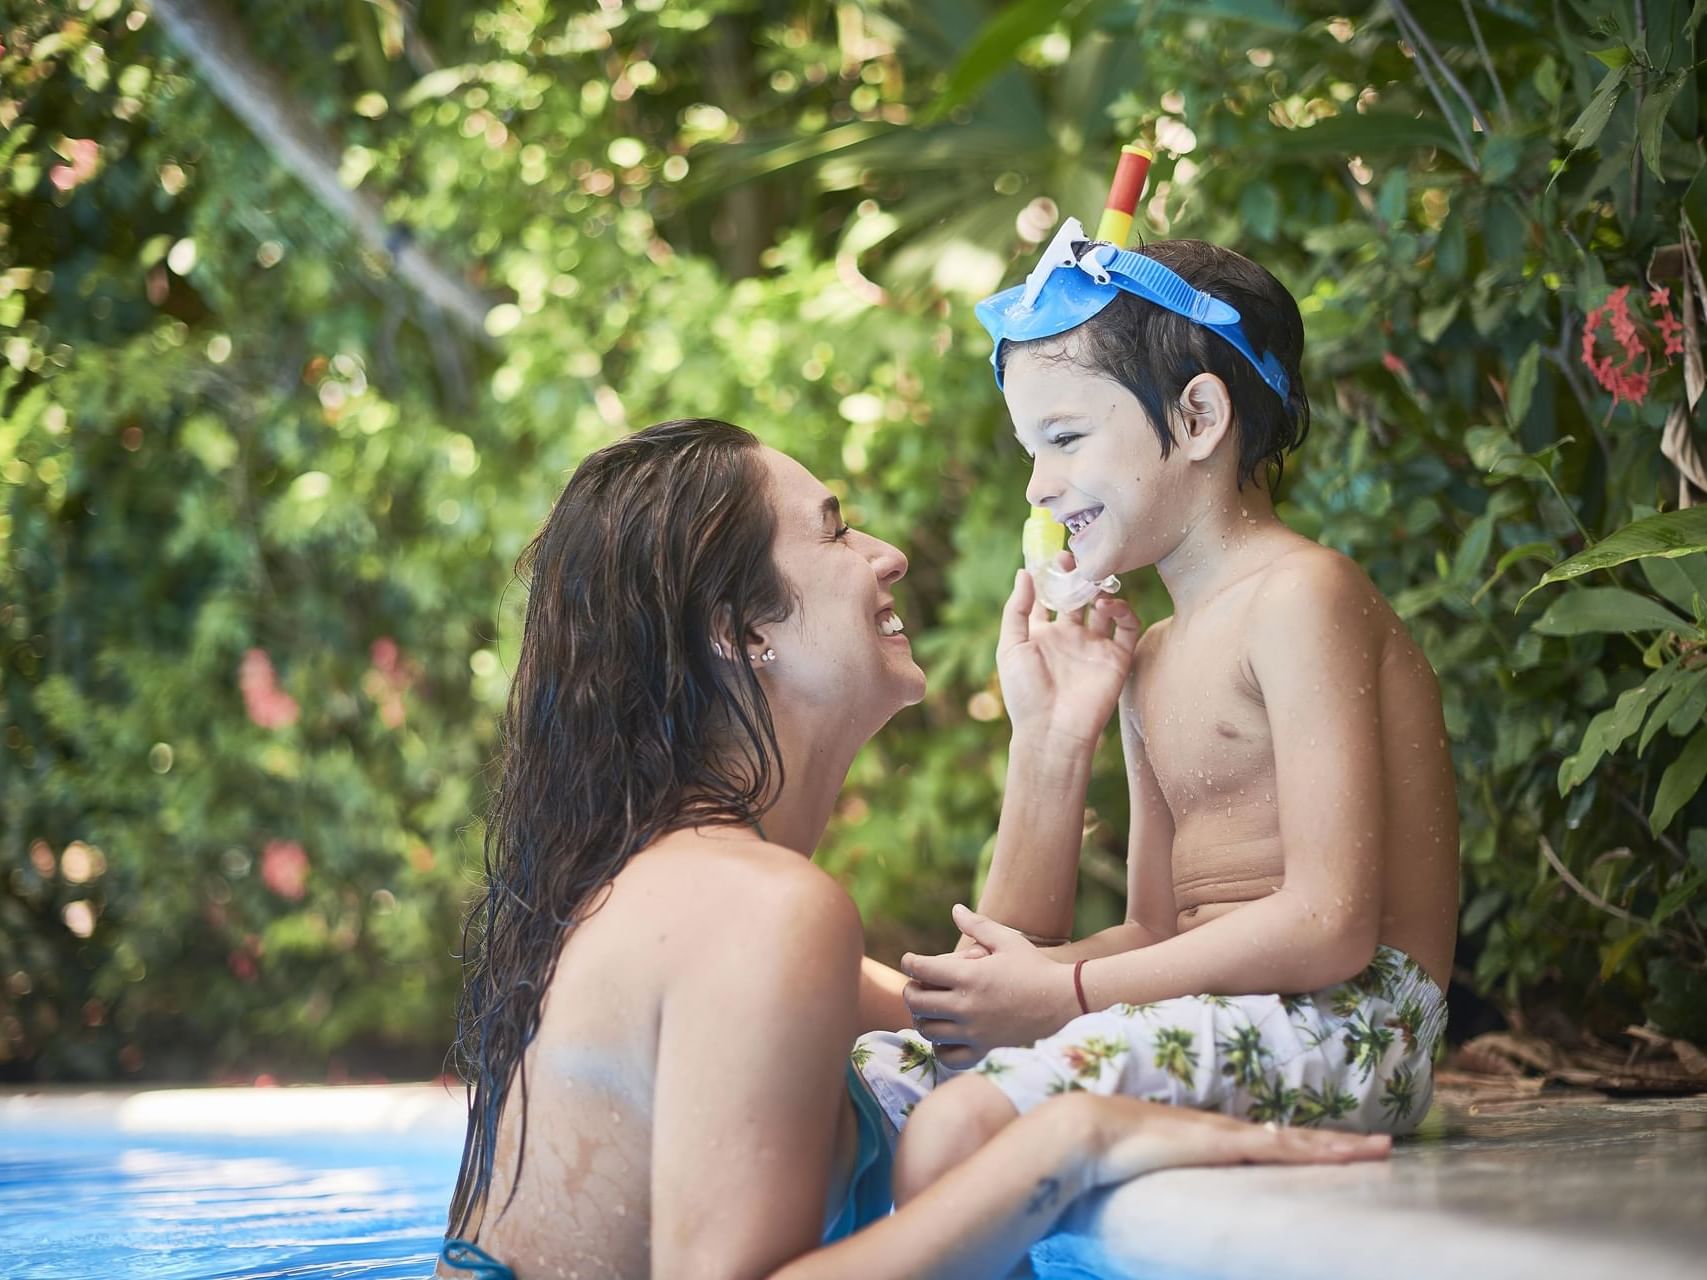 A kid and woman playing in the pool at Cala Luna Boutique Hotel